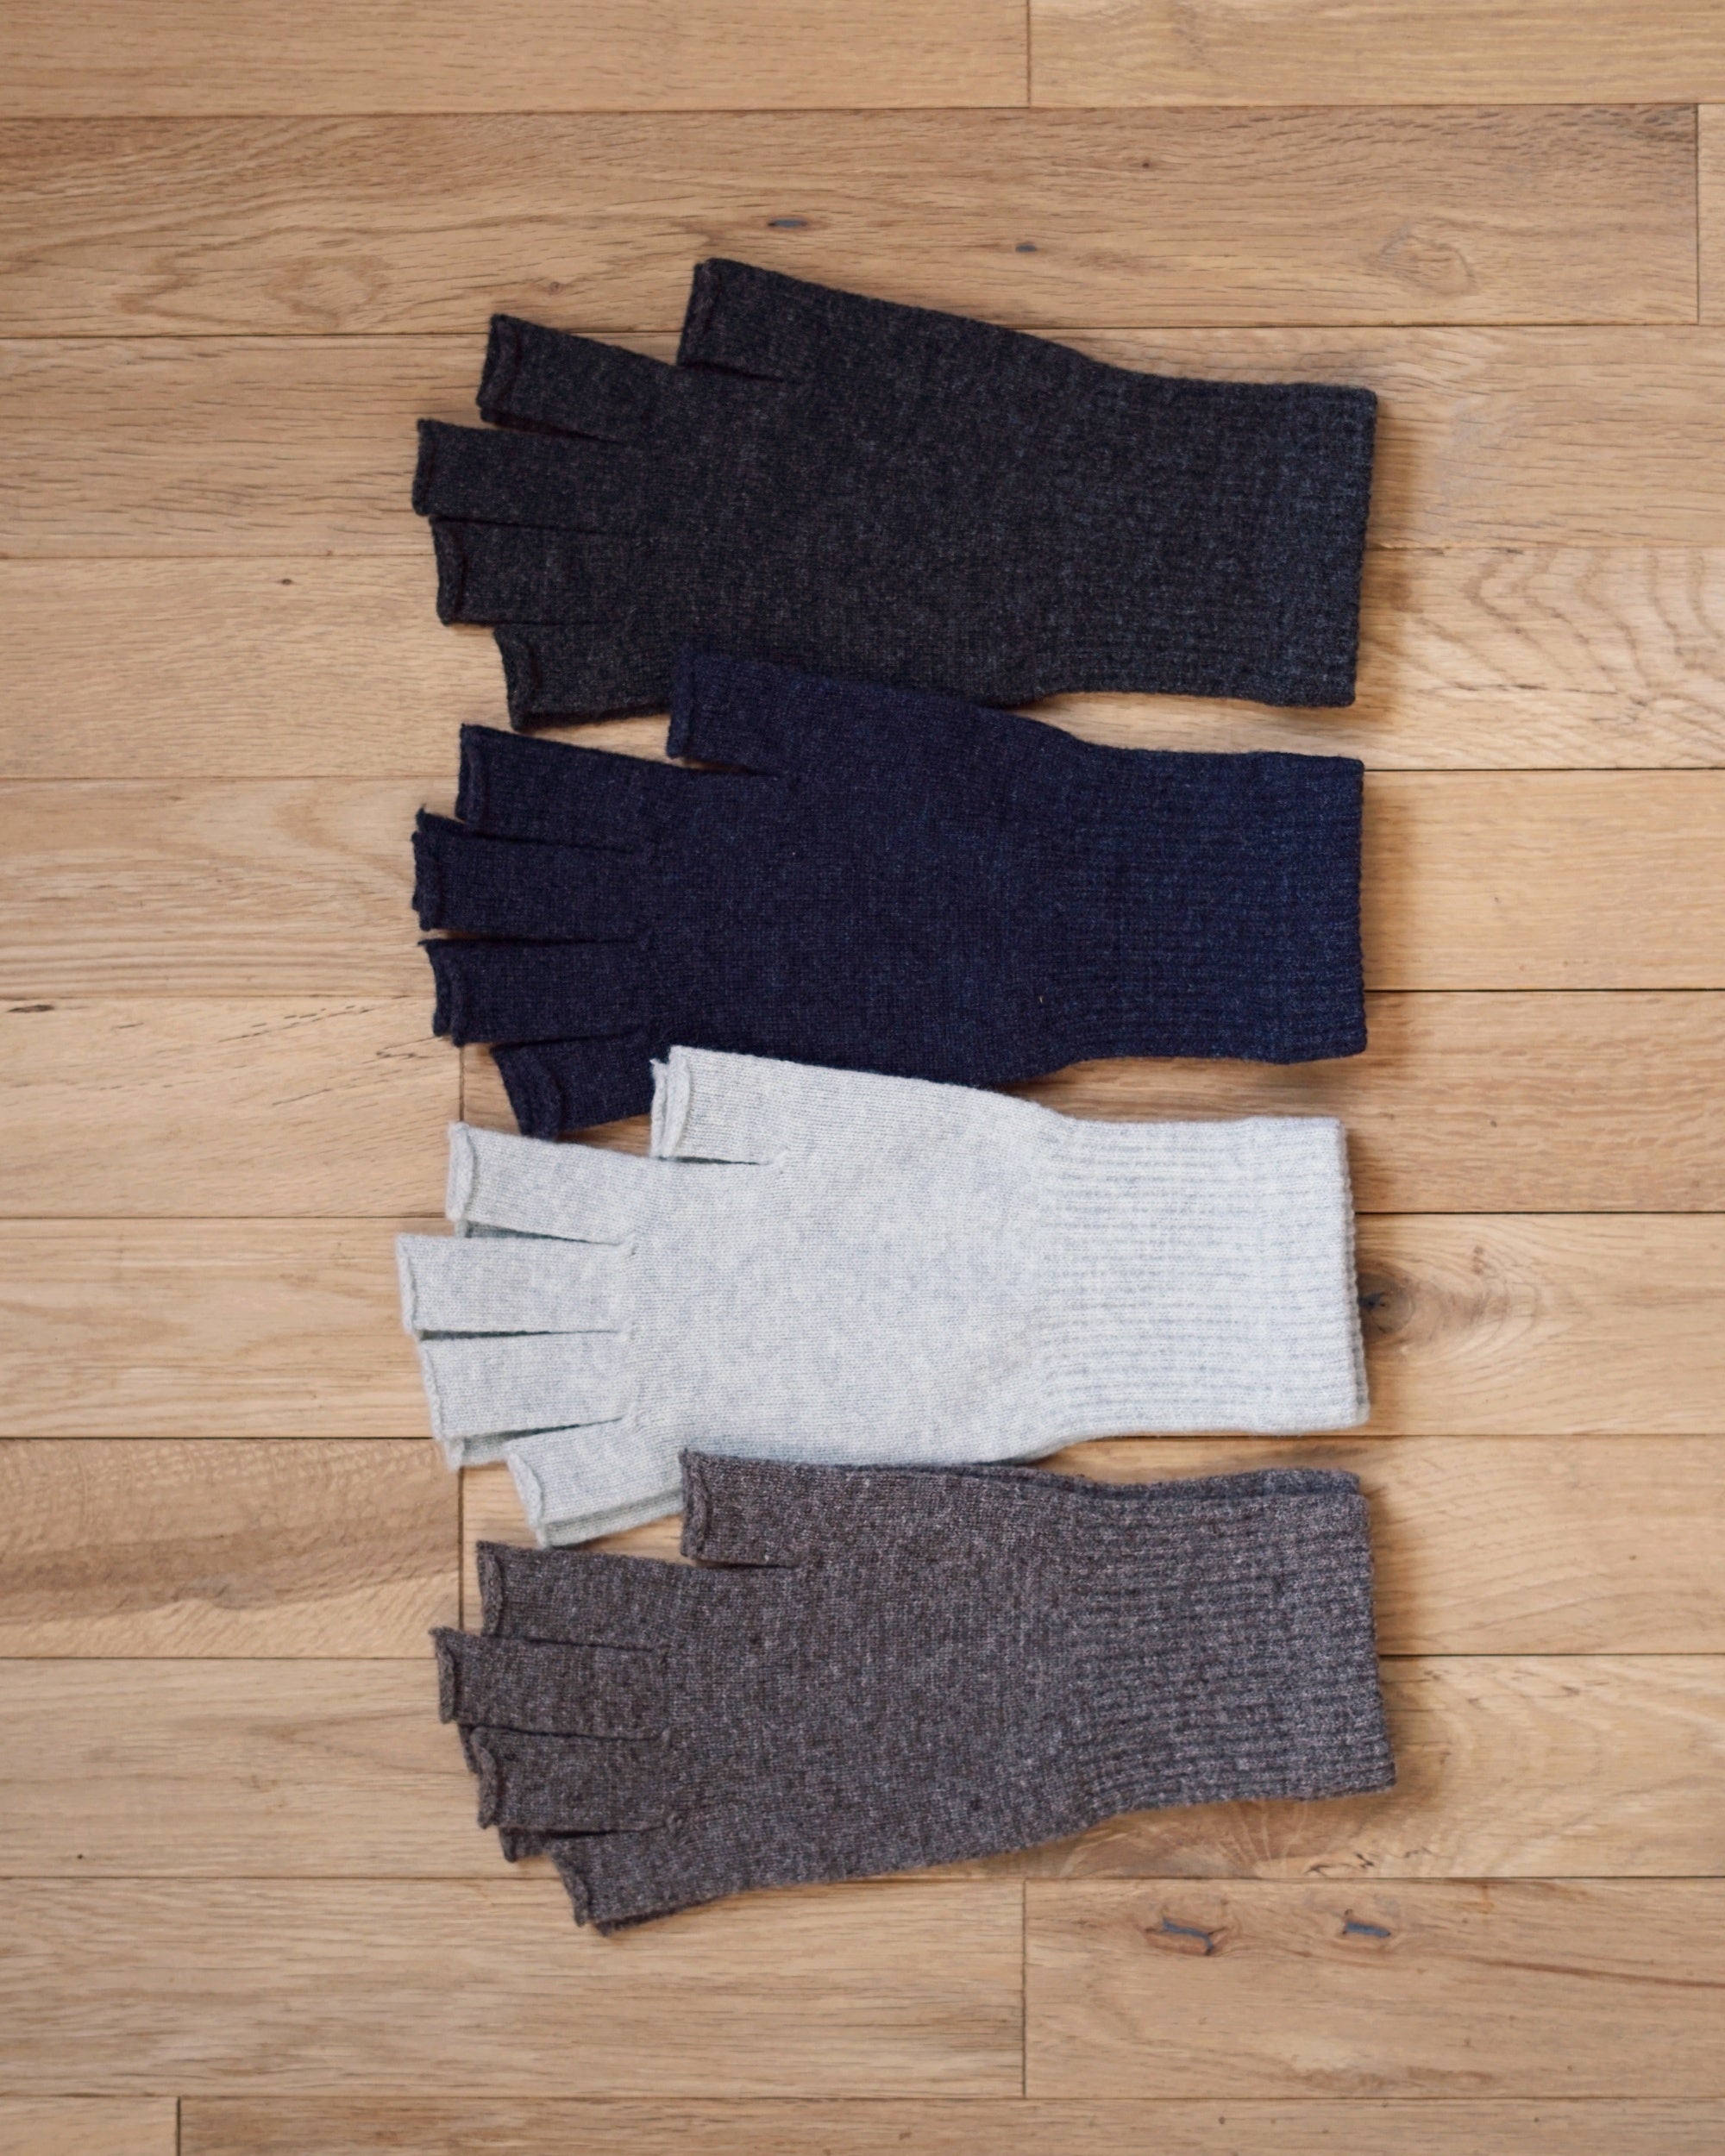 japanese made wool gloves